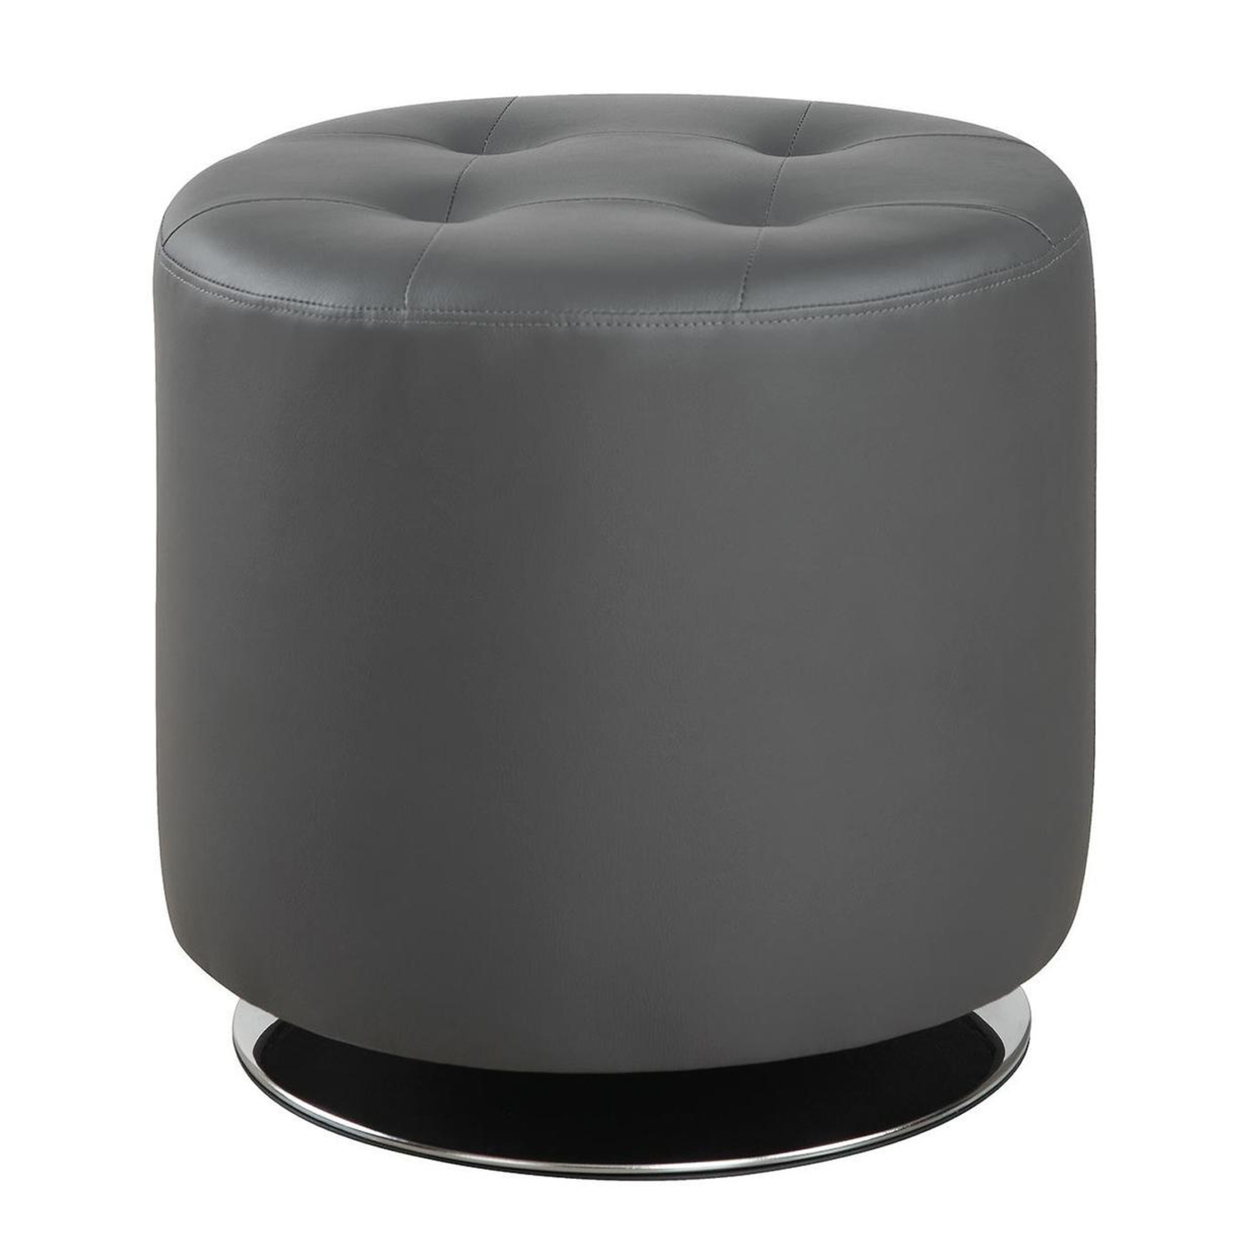 Round Leatherette Swivel Ottoman With Tufted Seat, Gray And Black- Saltoro Sherpi